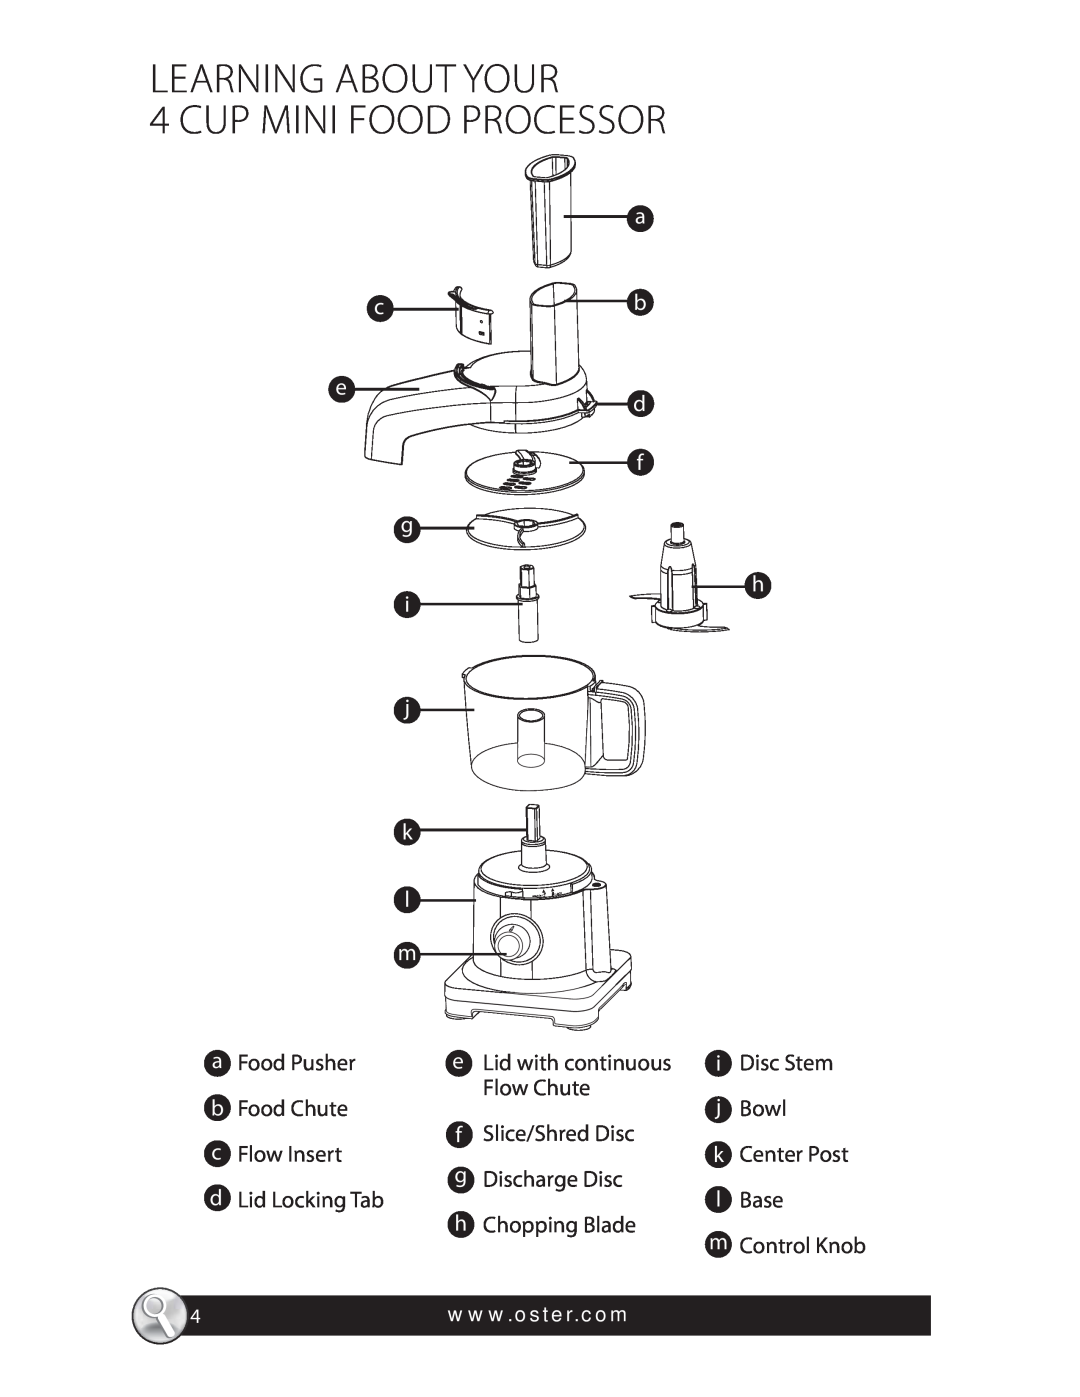 Oster FPSTFP4010 manual LEARNING ABOUT YOUR 4 CUP MINI FOOD PROCESSOR, c e g i j k l m, a b d f h 